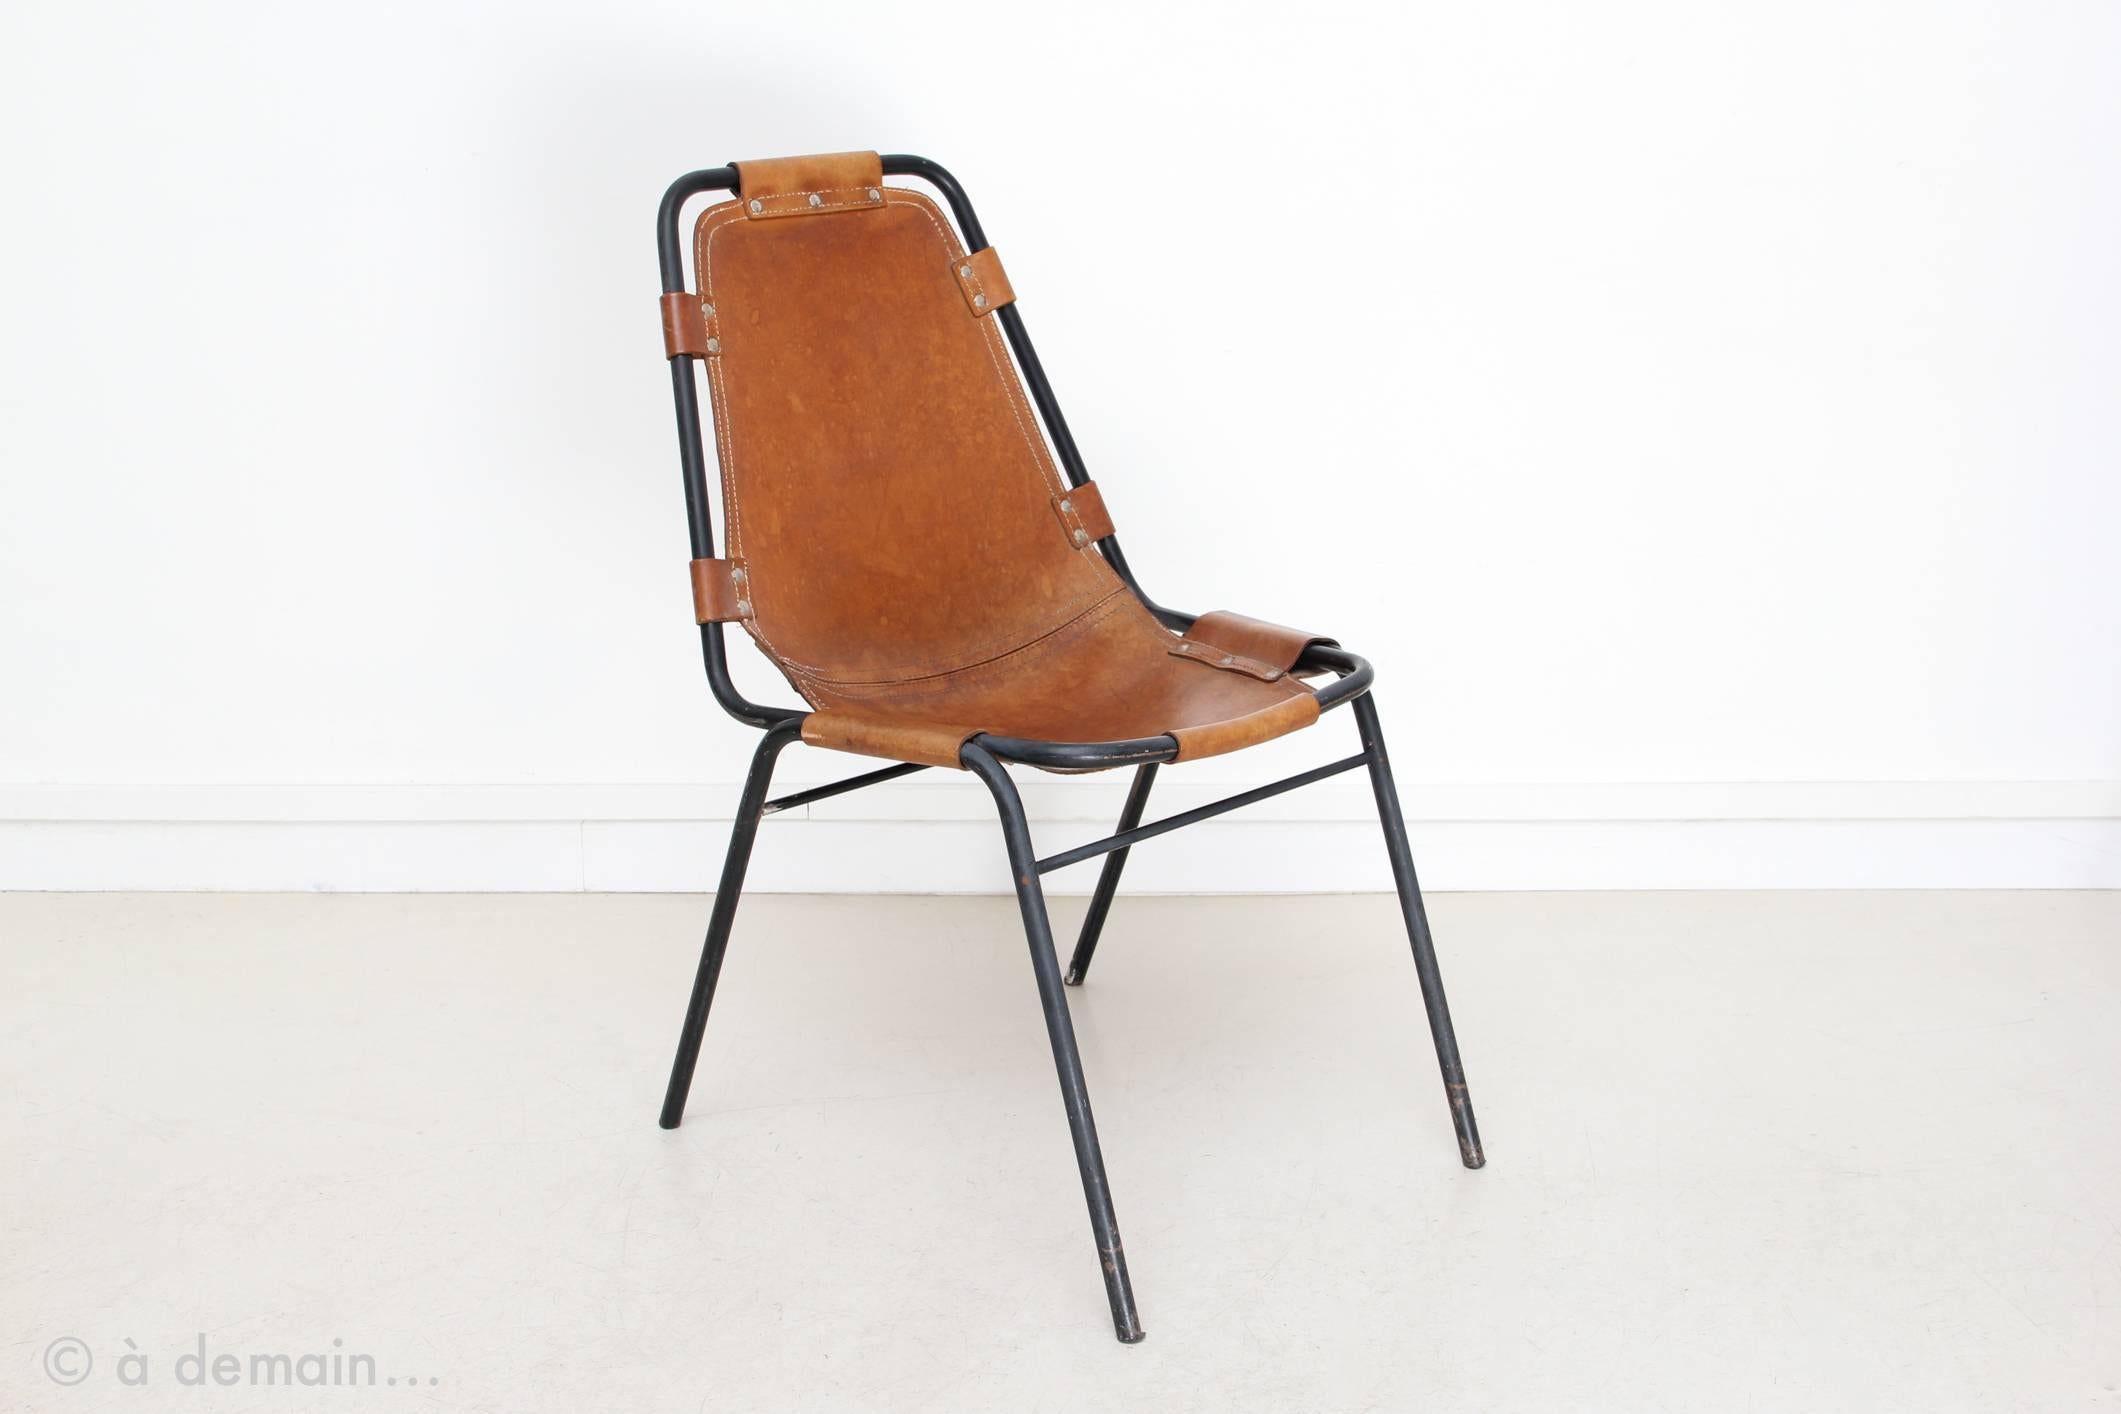 This mountain lady is one the greatest designer of the 20th century. She spent 20 years working at the huge architectural project of Les Arcs Ski Resort in Savoie, France. This chair is one the furniture Charlotte Perriand designed for this